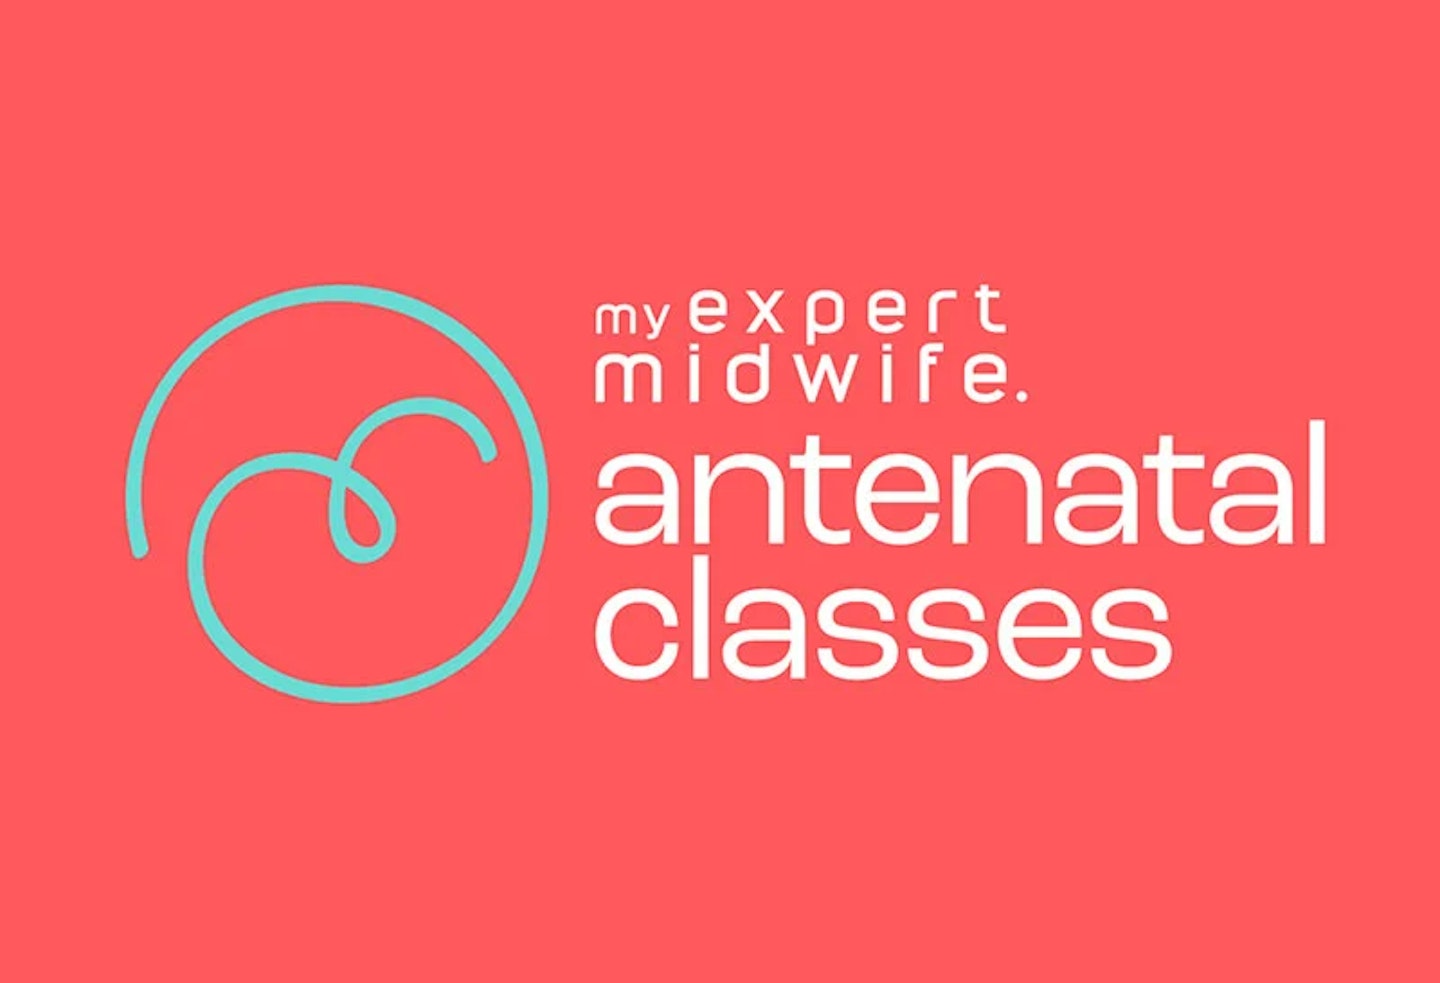 My Expert Midwife talk all things antenatal classes and preparing for birth